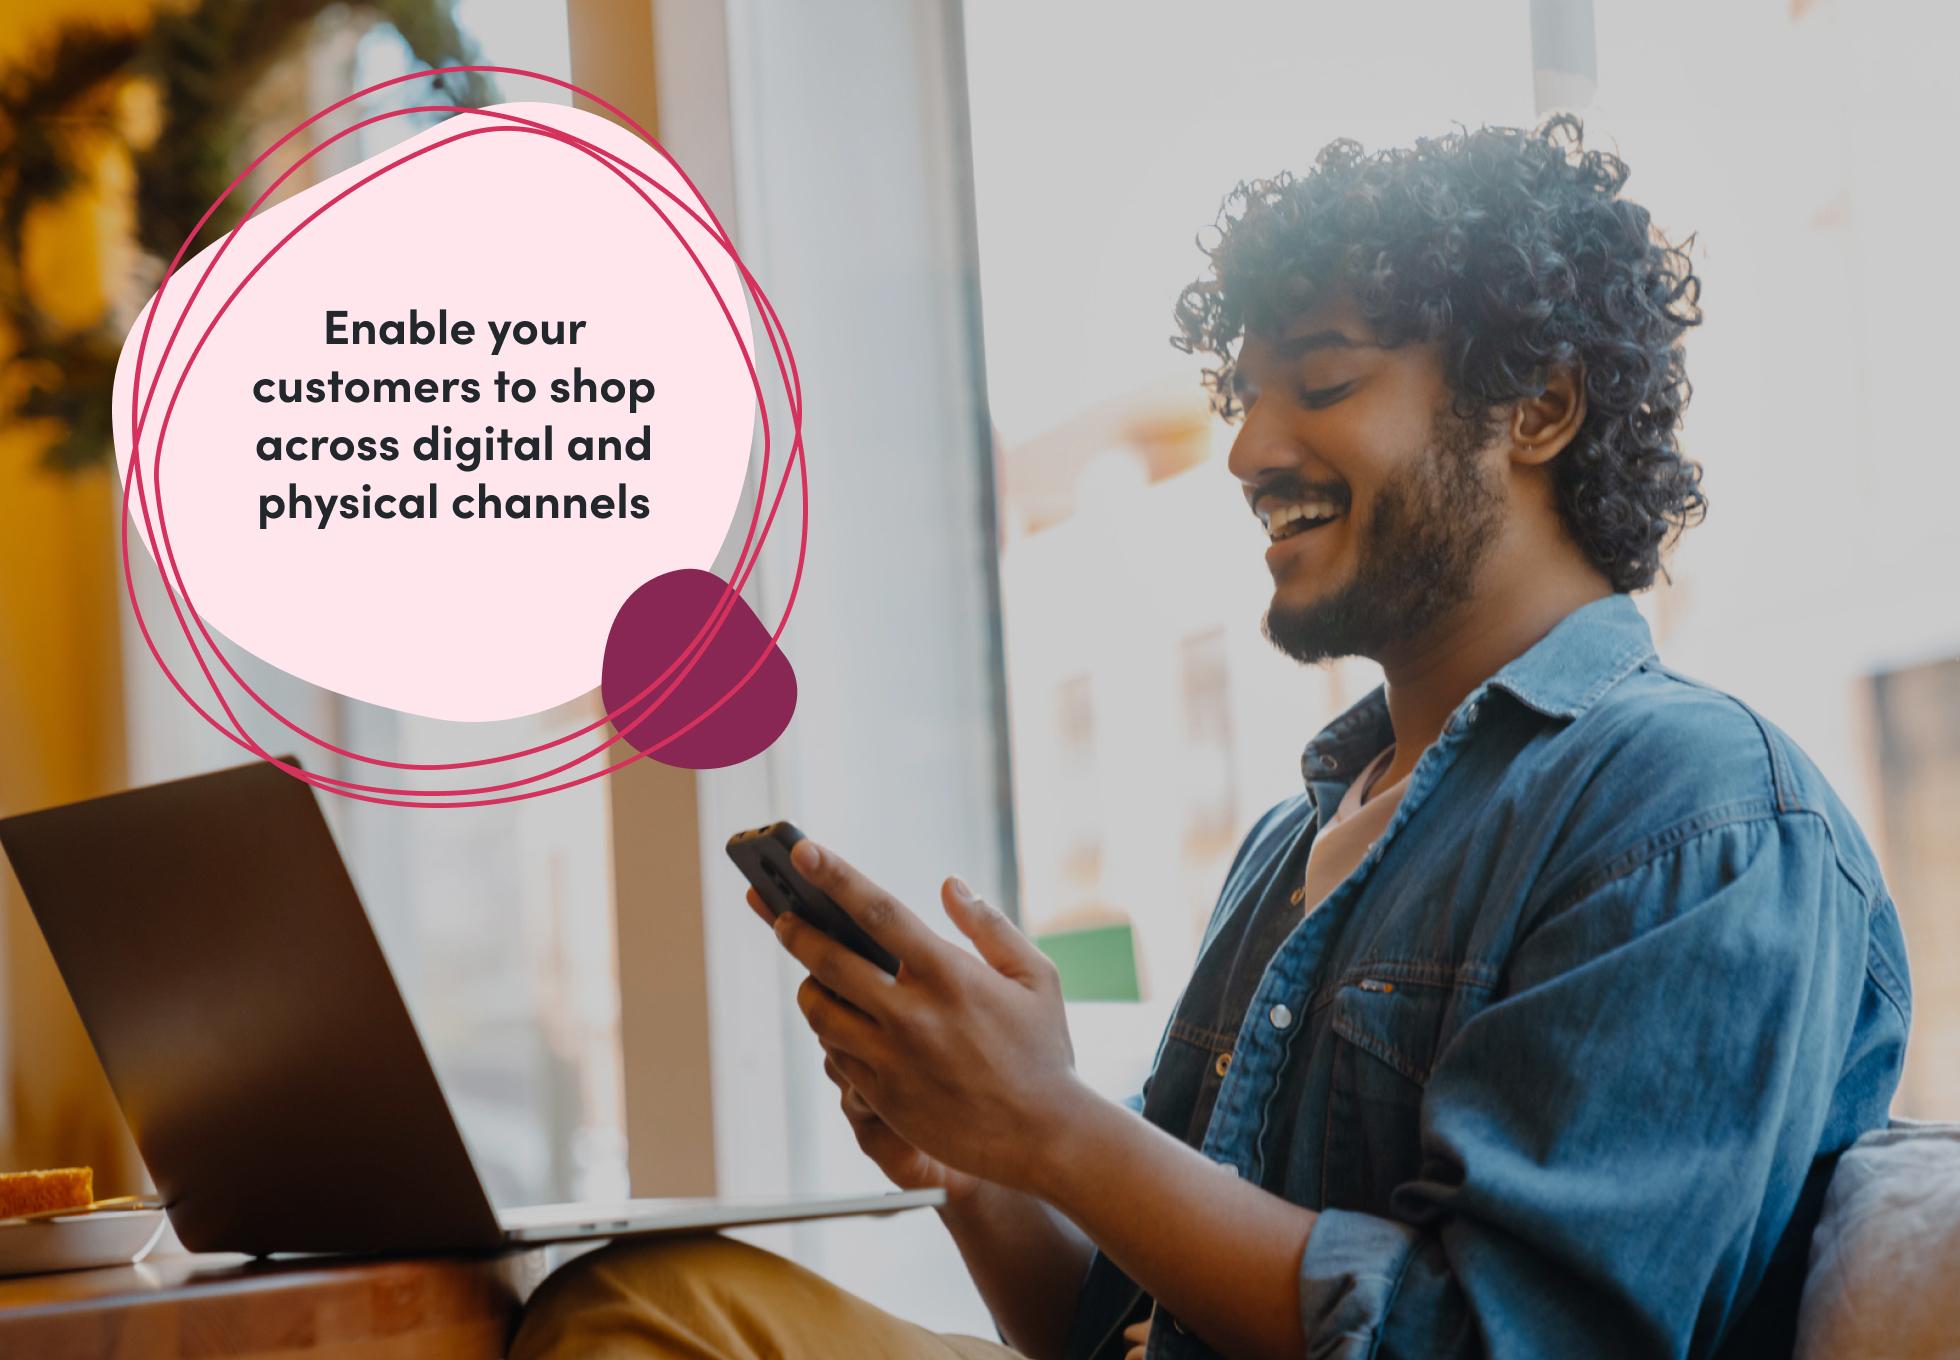 A person is sitting with their laptop and holding a phone in their hands. Overtop this image says "Enable your customers to shop across digital and physical channels."